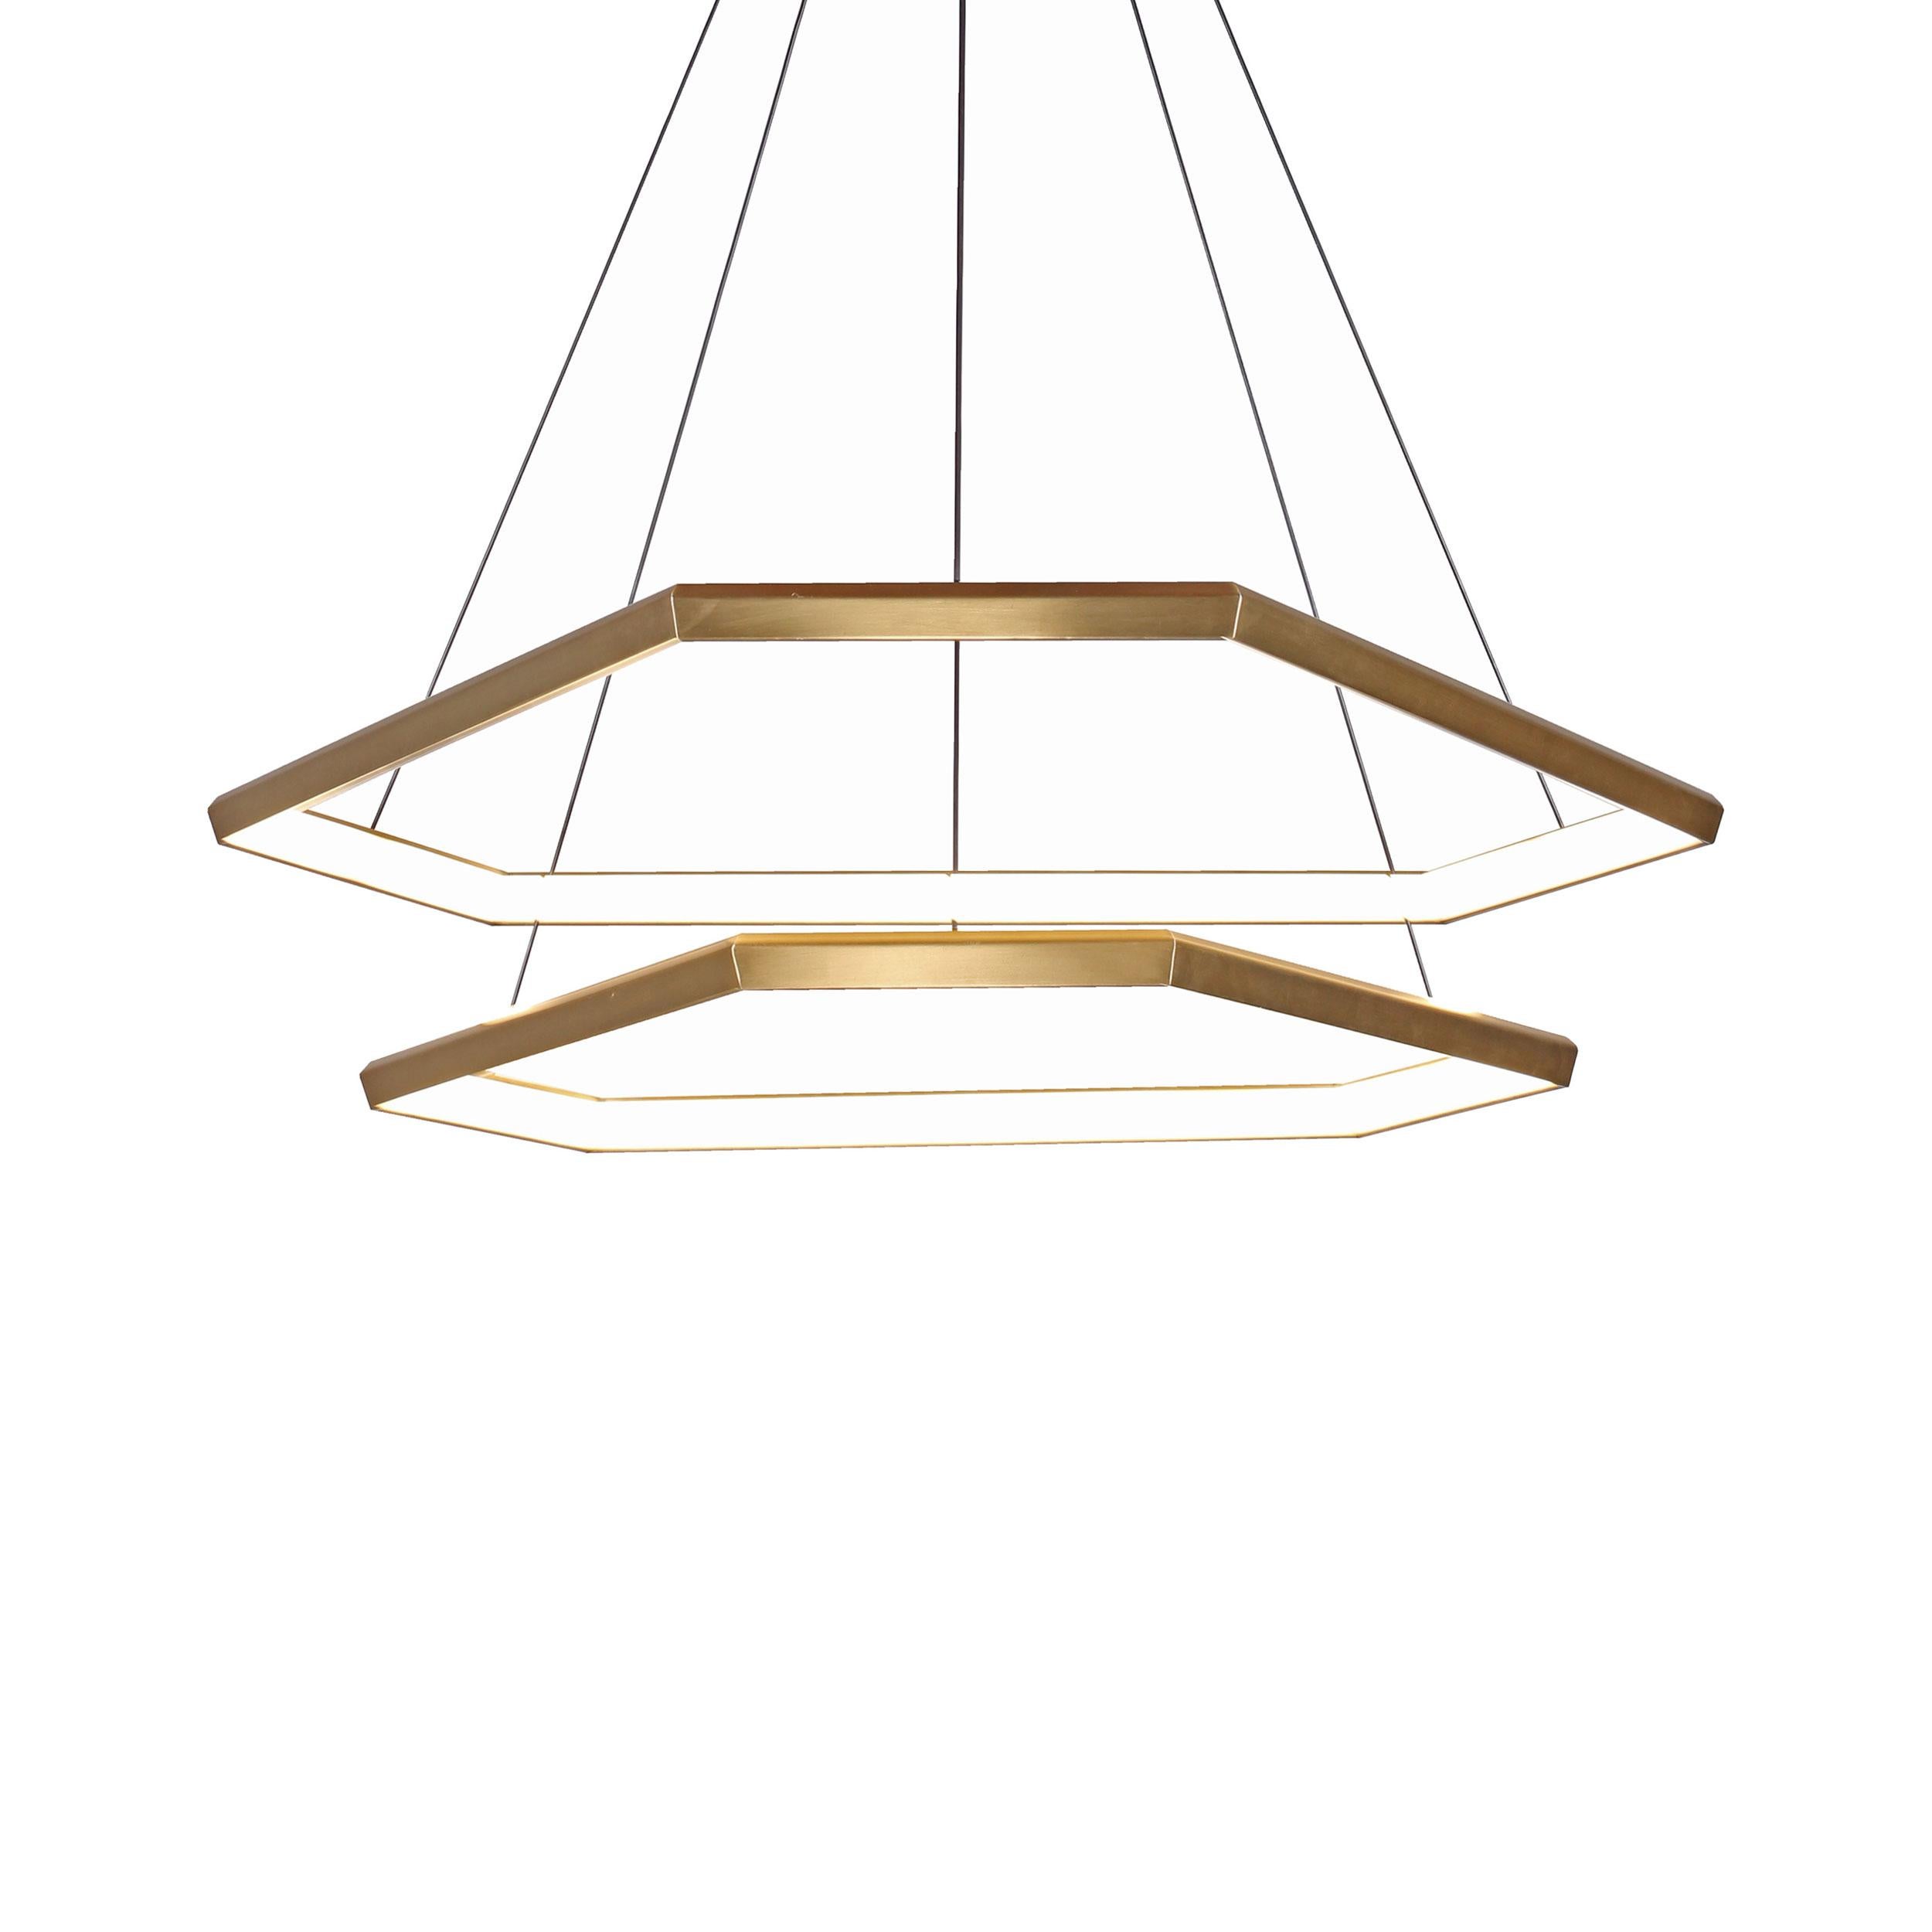 DITRI takes the form of a sleek ditrigon, a blend between a convex hexagon and a triangle. This line was inspired by the flawless natural form of a unique type of snowflake. This double tiered fixture is a natural volumetric progression of the DITRI